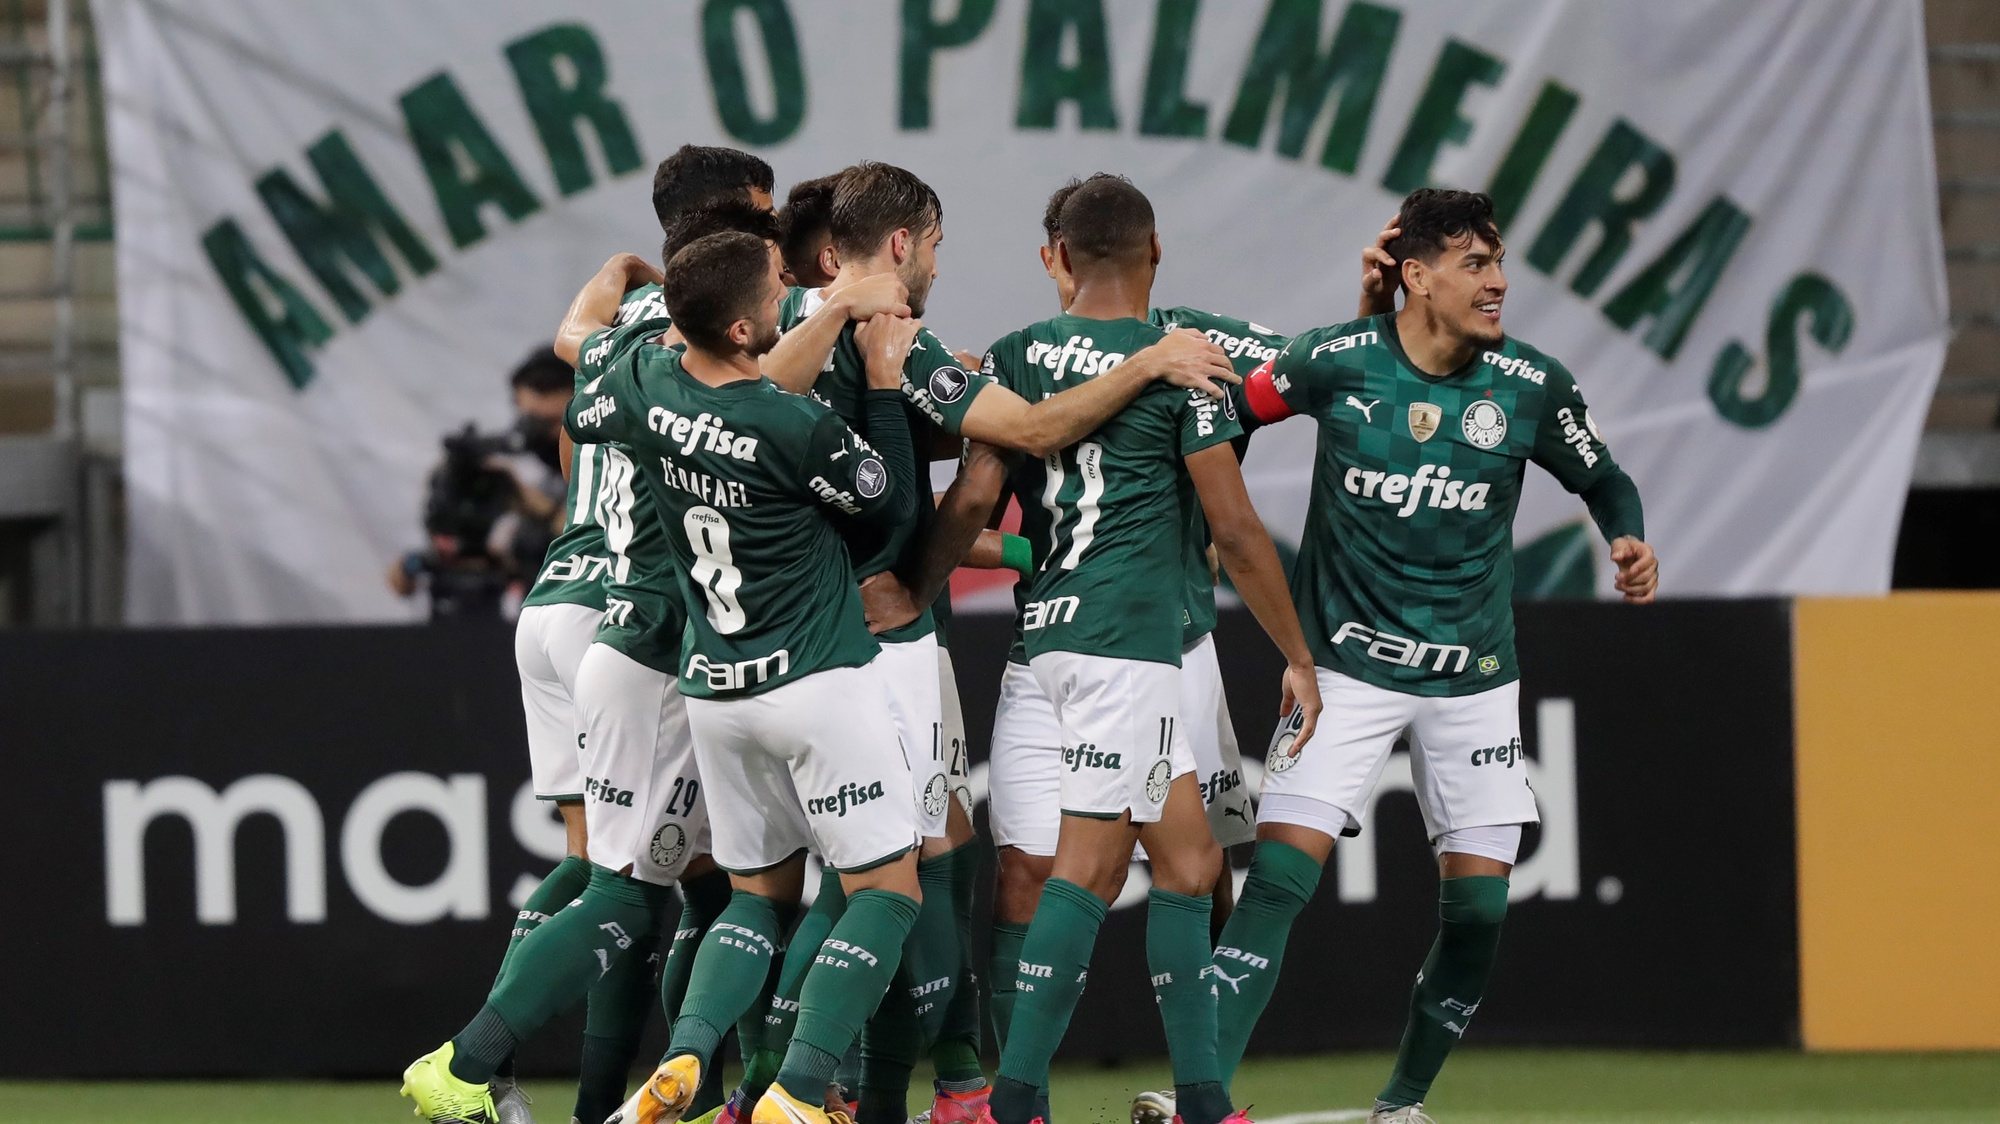 epa09232228 Gustavo Raul Gomez (R) of Palmeiras celebrates a goal with his teammates against Universitario during a Copa Libertadores soccer match between Palmeiras and Universitario at the Allianz Parque stadium in Sao Paulo, Brazil, 27 May 2021.  EPA/Andre Penner POOL